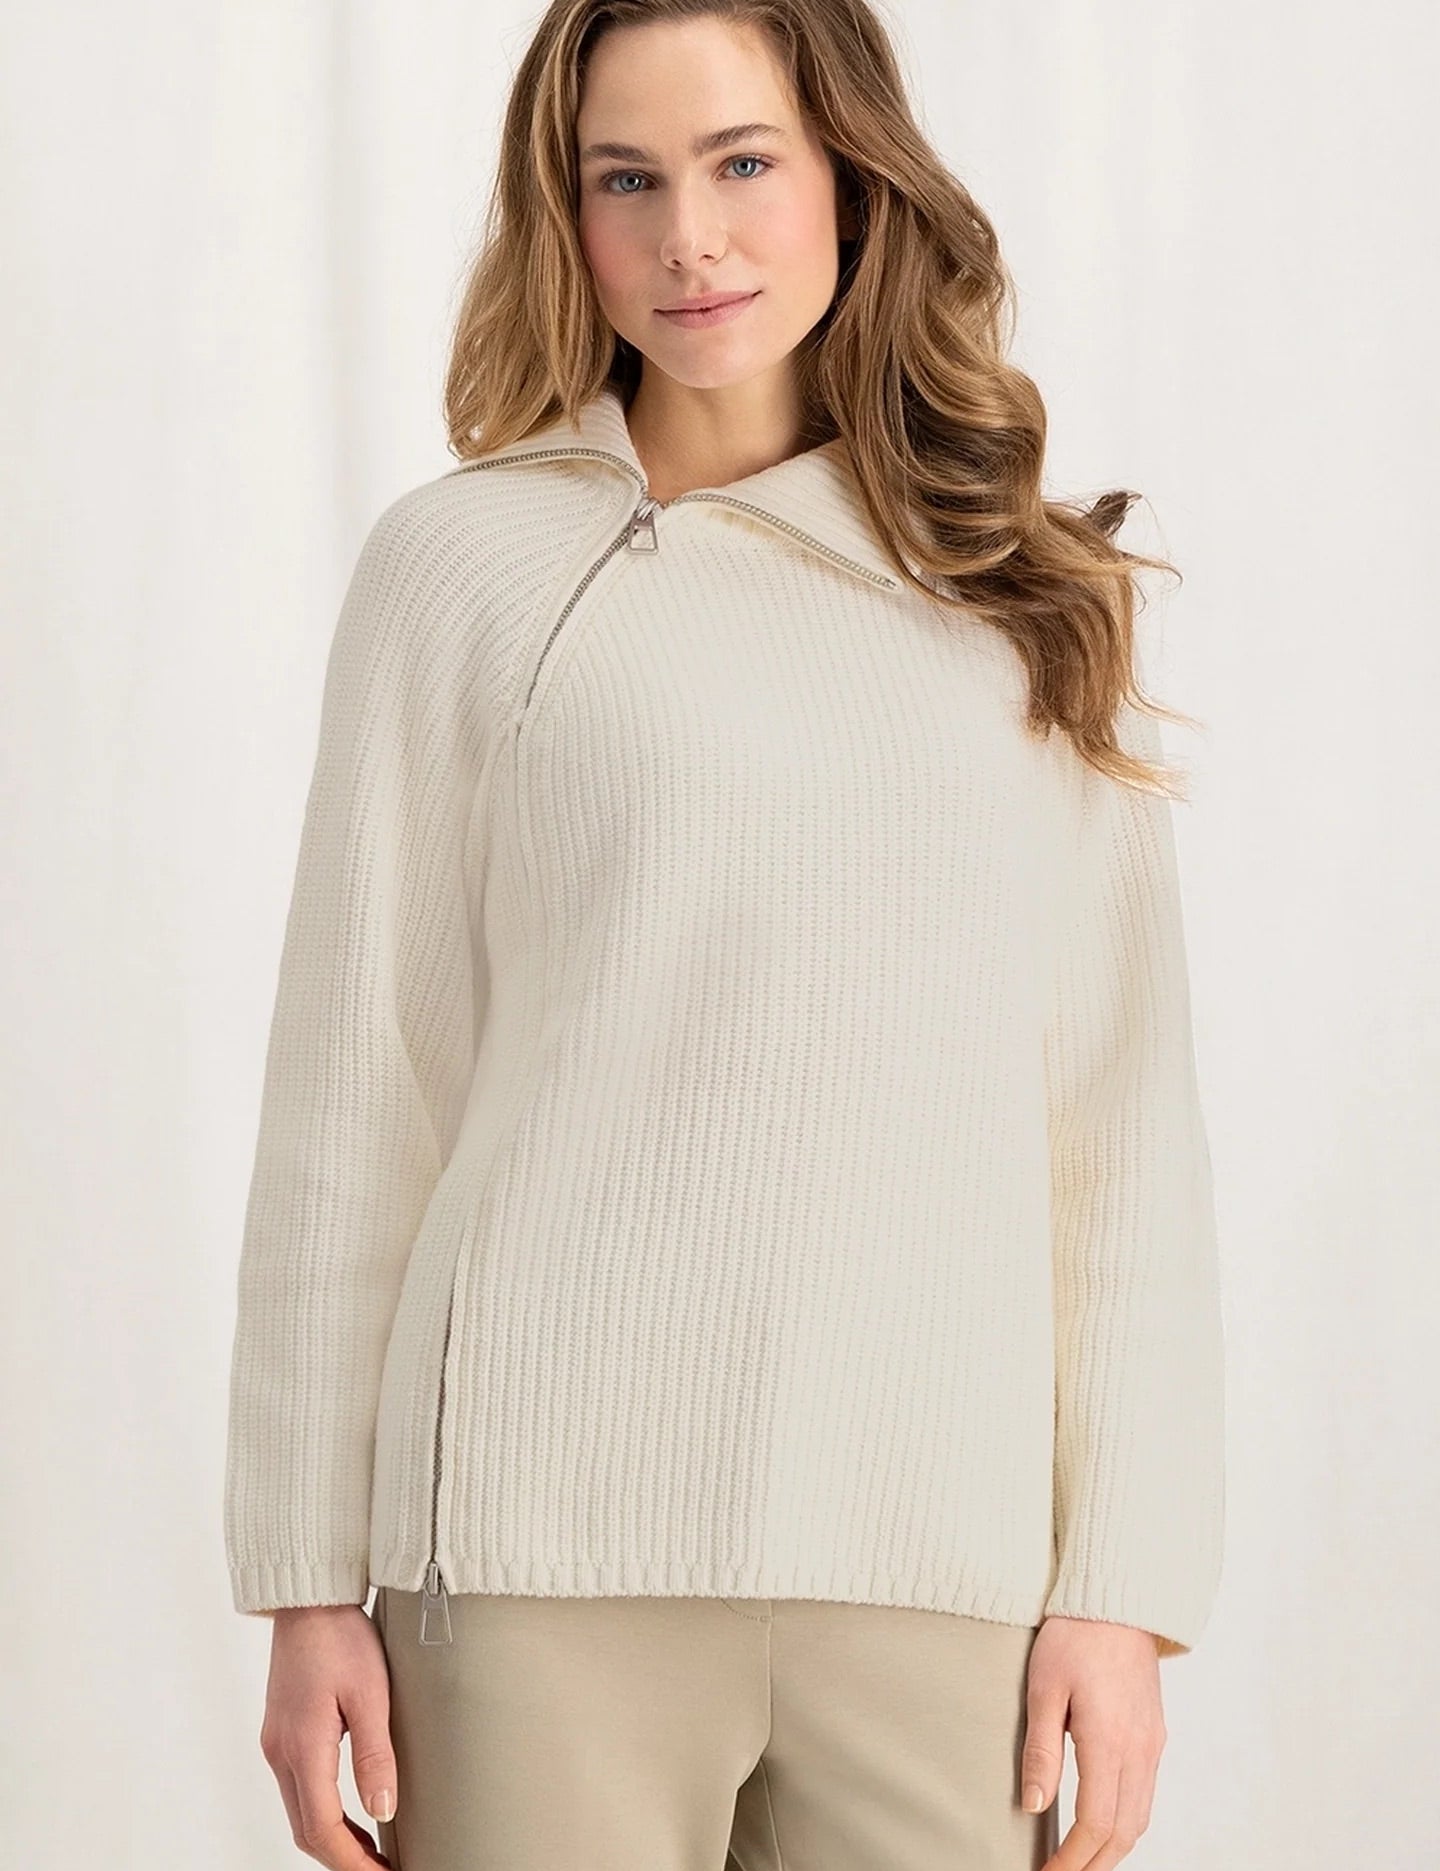 ribbed-sweater-with-turtleneck-long-sleeves-and-zip-off-white-knit_2880x_jpg.jpg